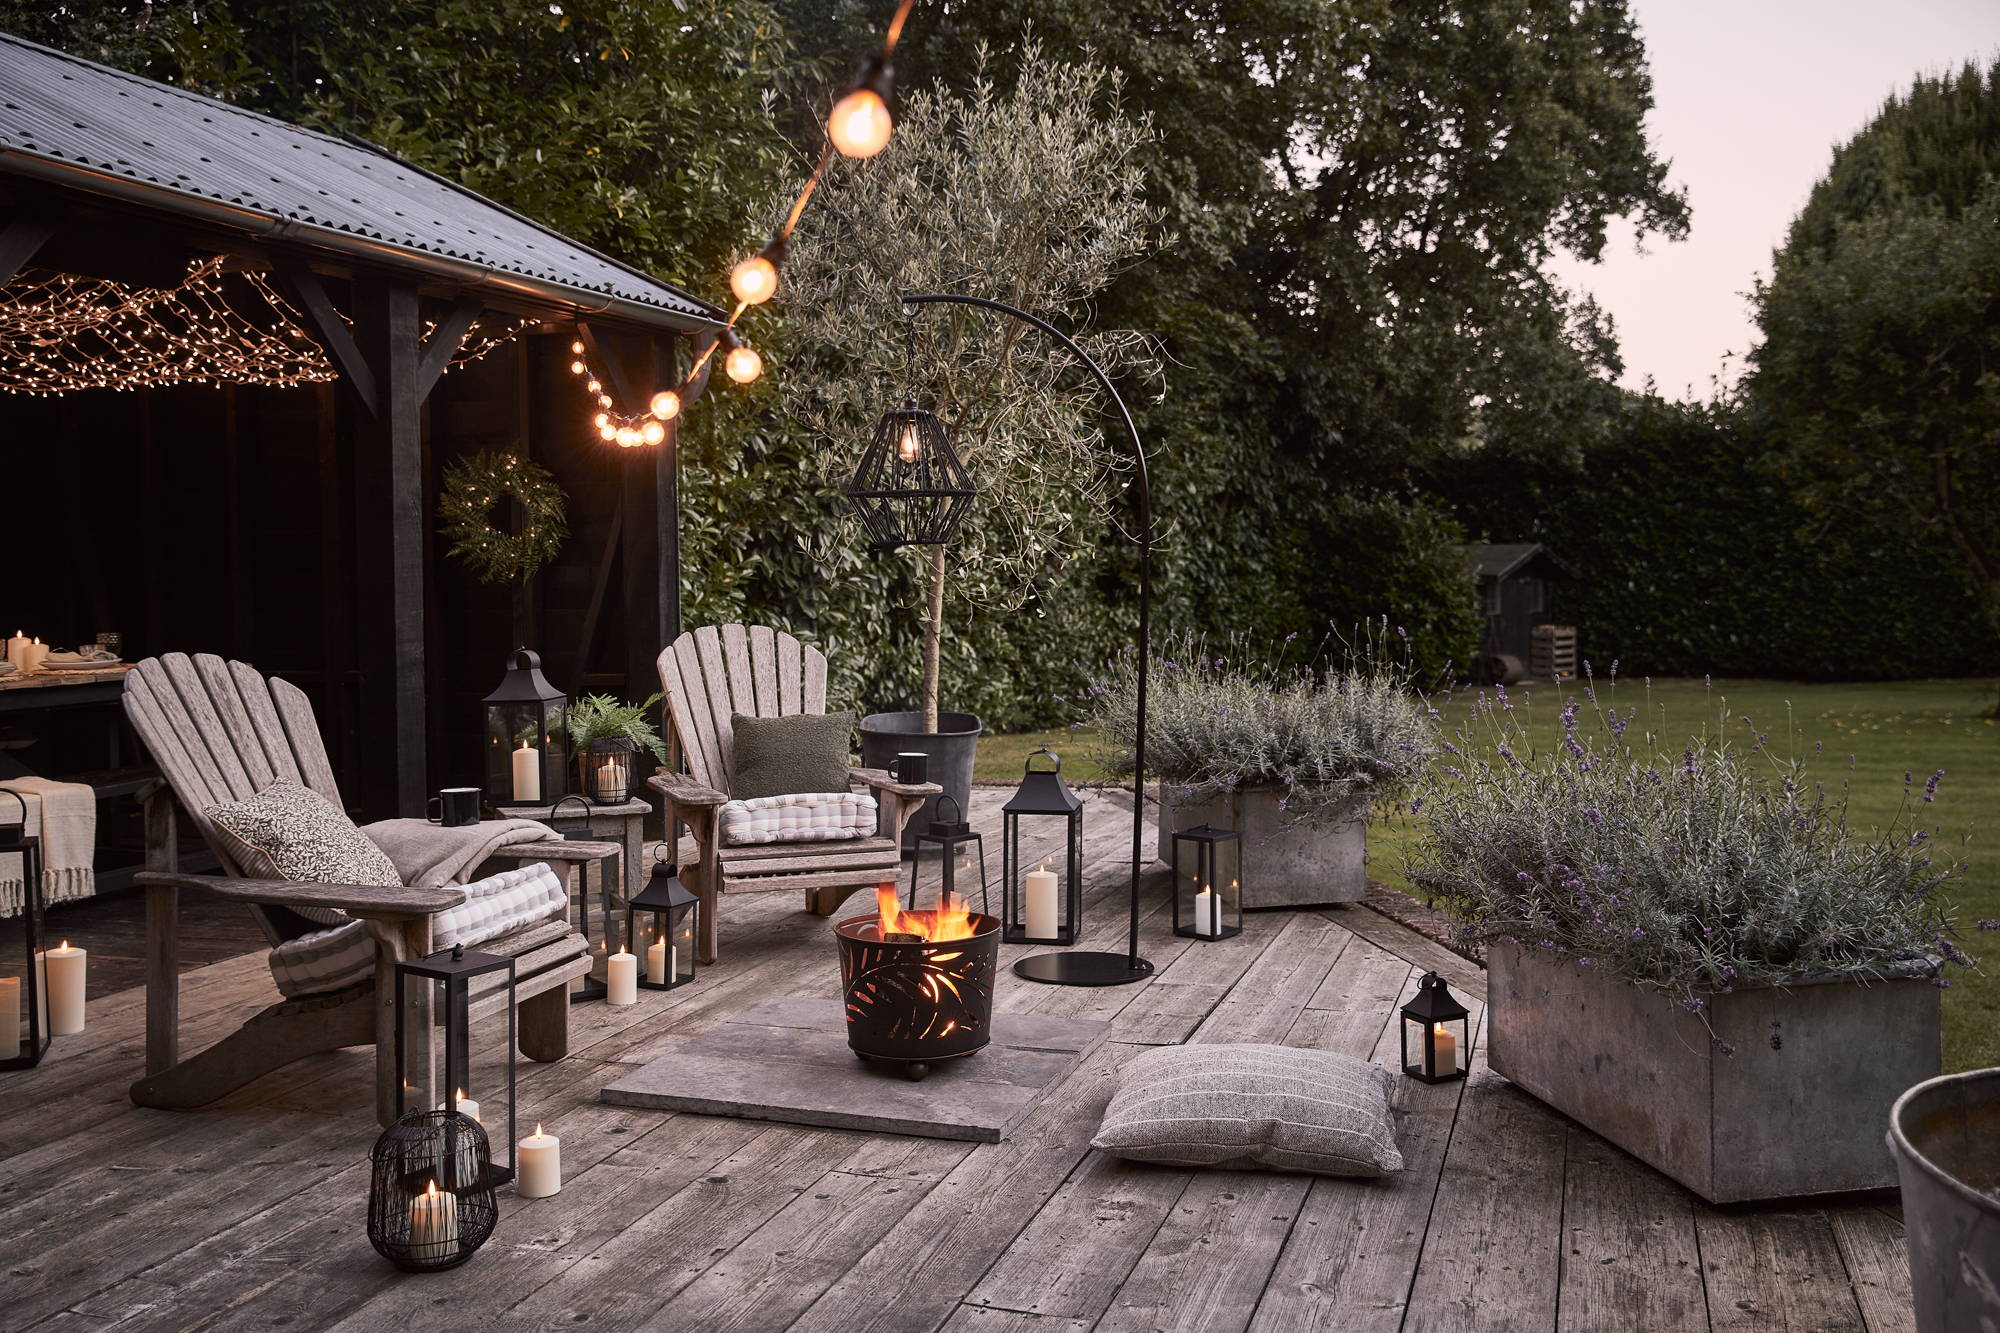 An outdoor summer seating area with LED candles and lanterns, a cosy firepit and warm white festoon lights hanging above.